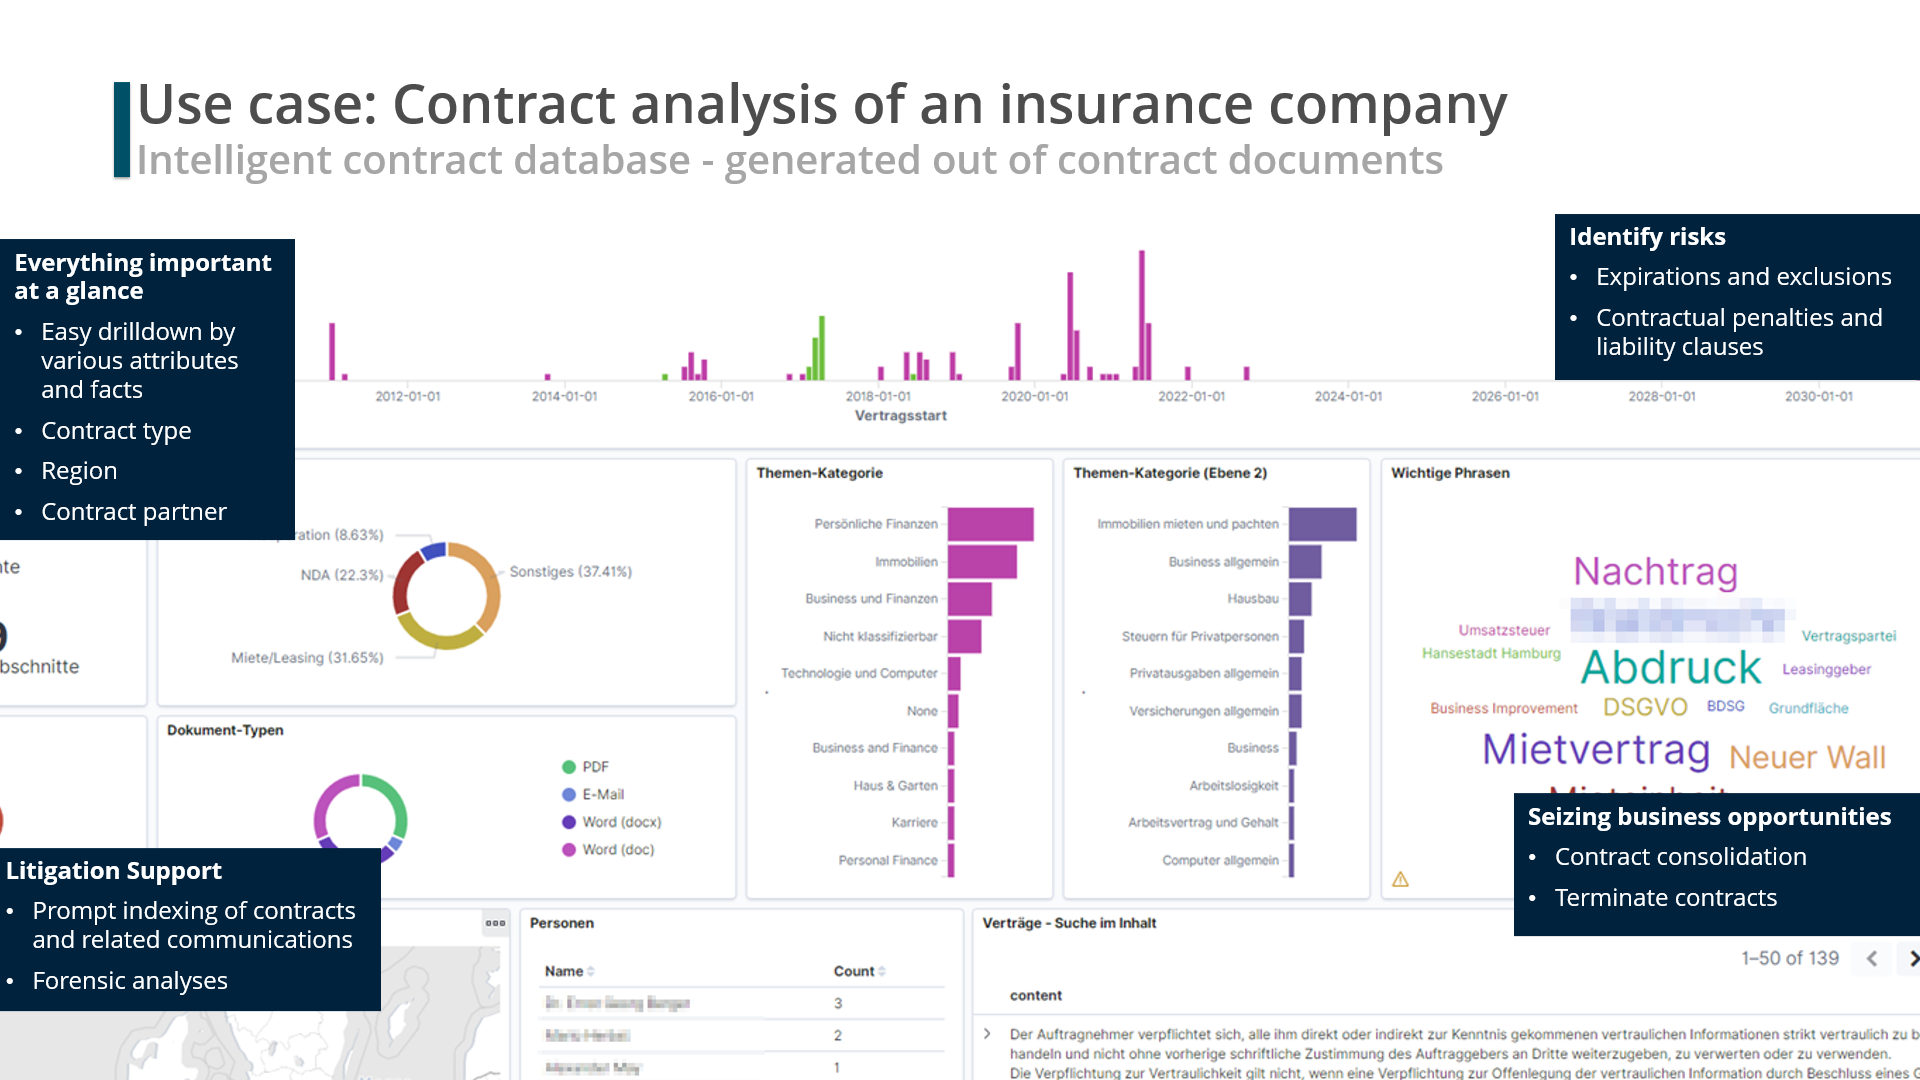 Use case of an insurance company: CONTEXTSUITE as intelligent contract database.